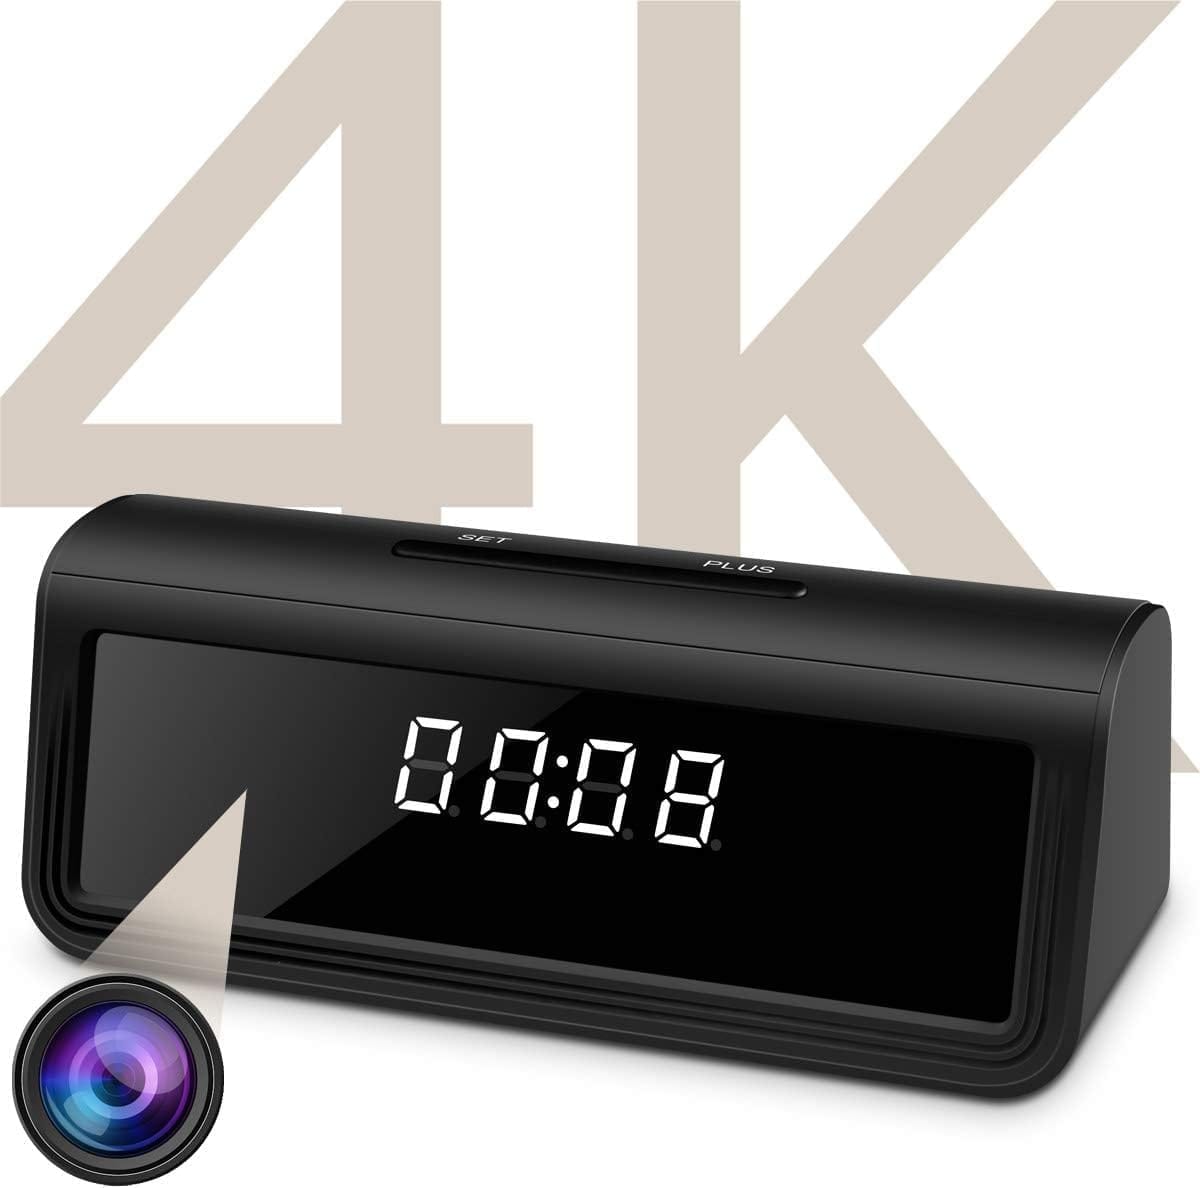 Discover the Ultimate Hidden Surveillance Tool: The Best Clock Spy Camera